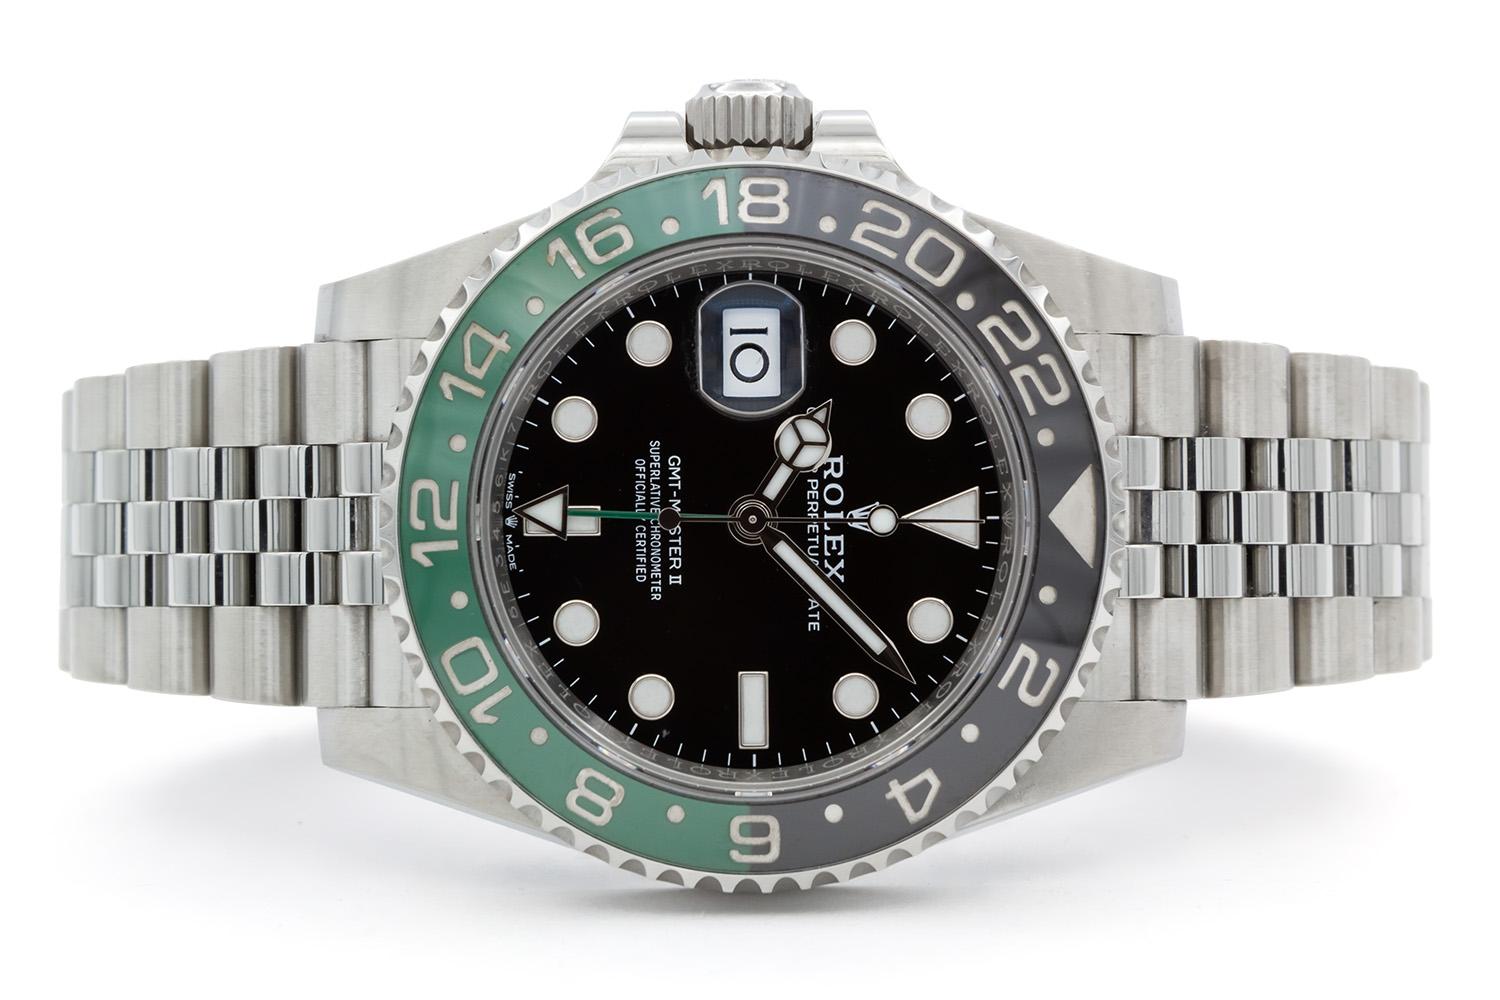 We are pleased to offer this Excellent Condition Rolex Mens Stainless Steel GMT Master II 126720VTNR “Sprite”. This watch features the classic 40mm stainless steel case in a left handed version, elegant Rolex black maxi dial, Rolex green & black